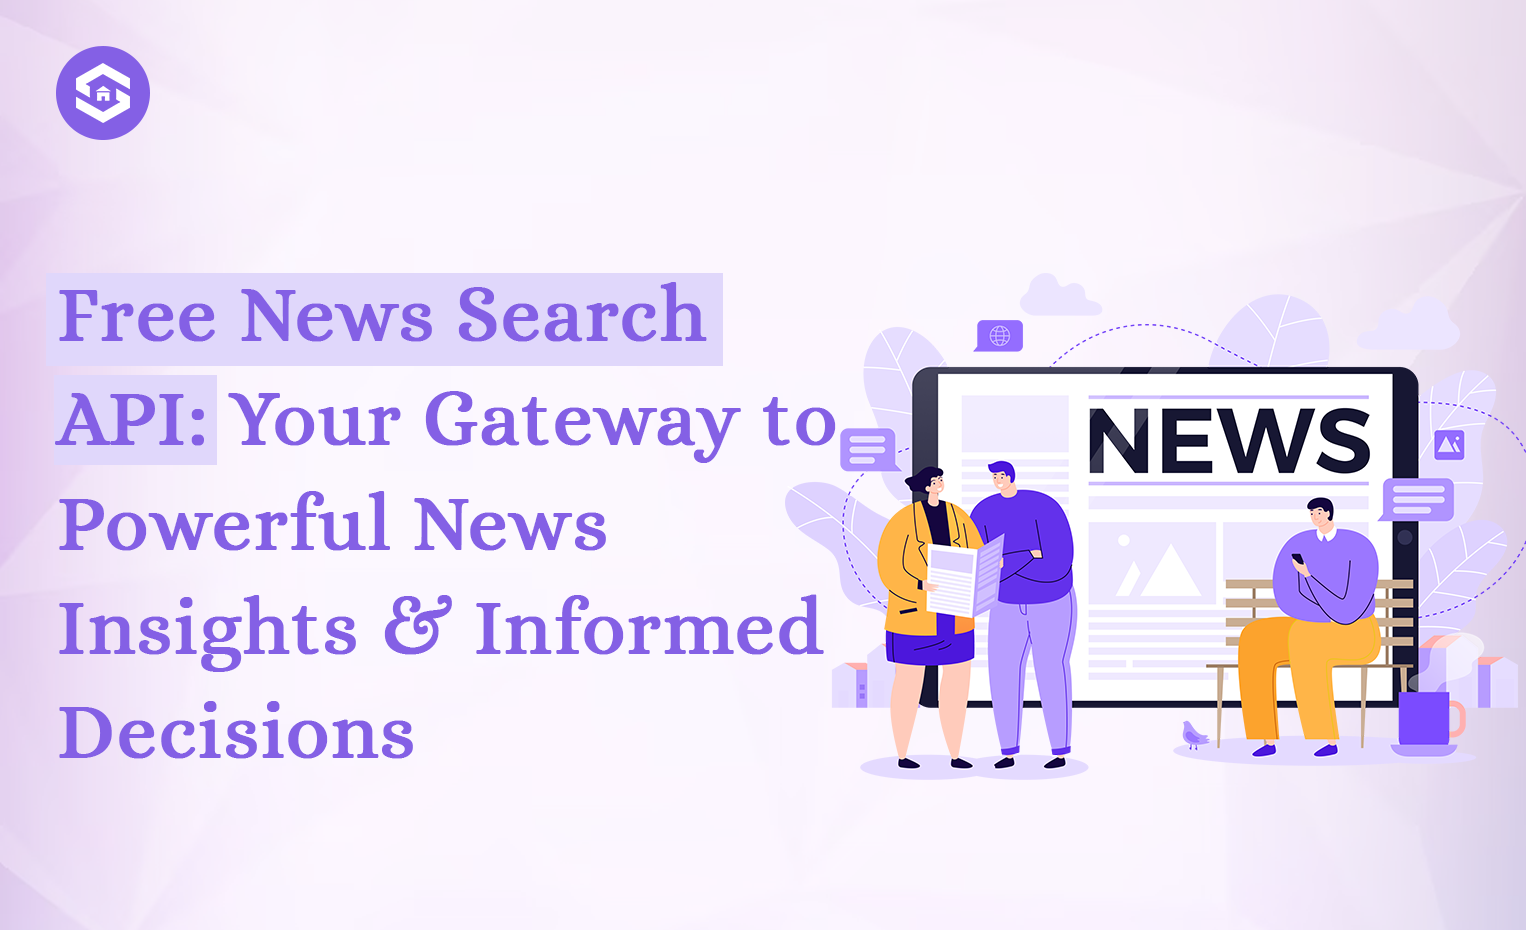 Step-by-Step Guide to Get Started with SERPHouse Free News Search API